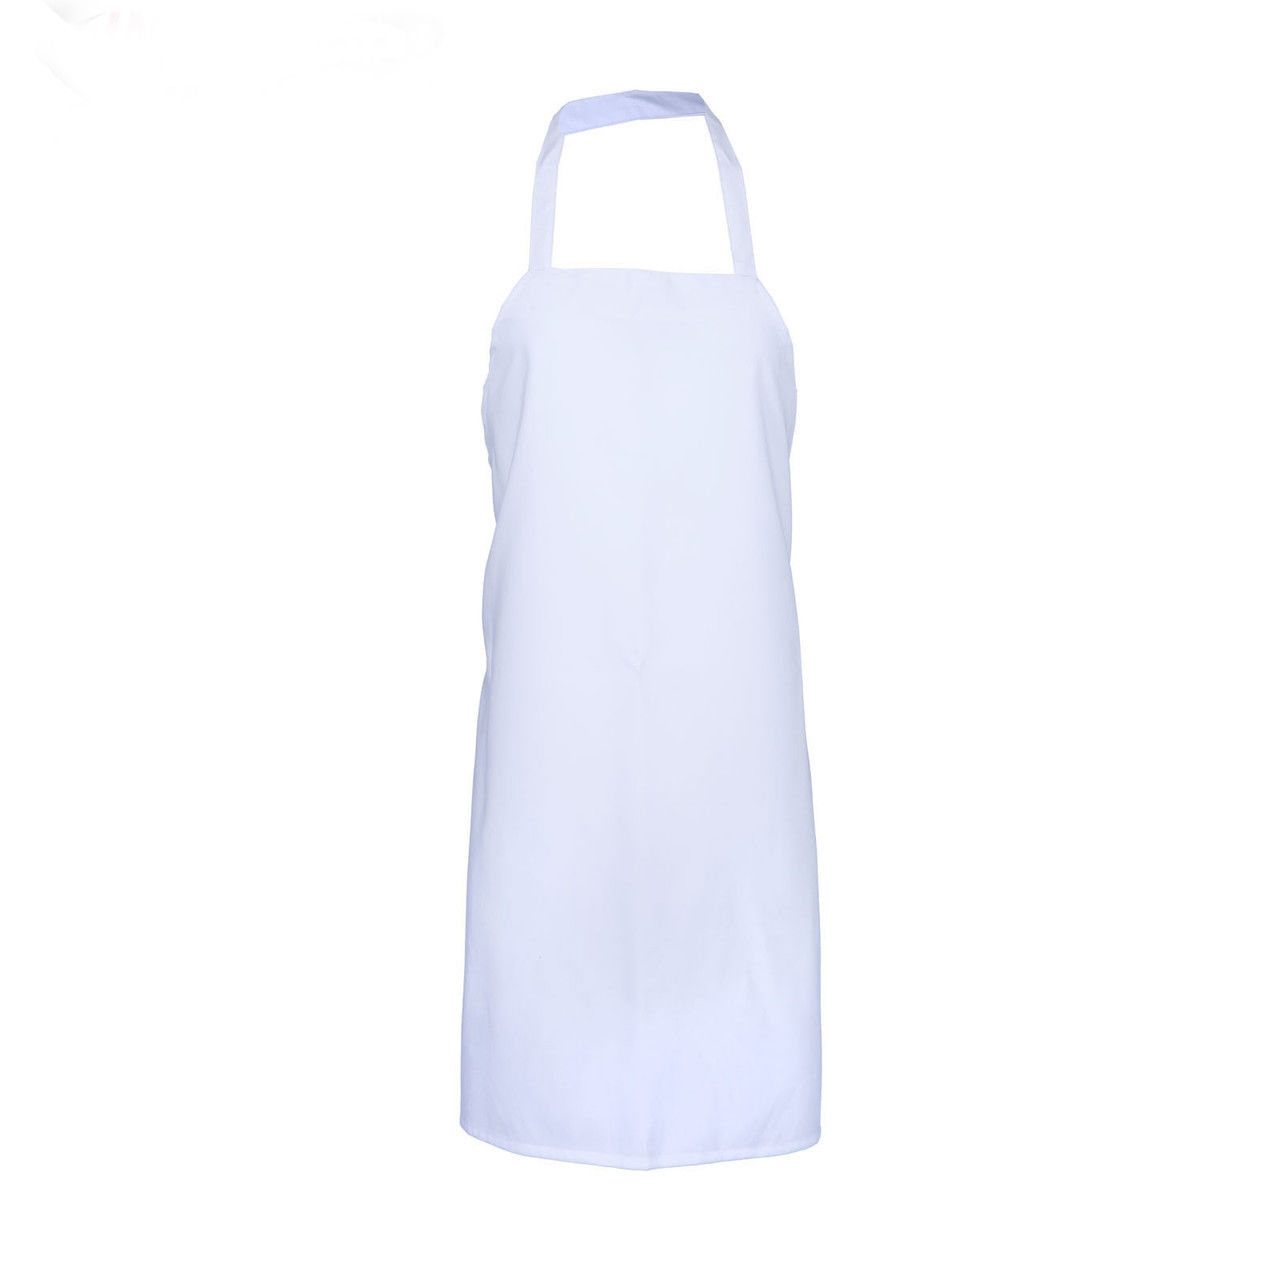 Basic Bib Aprons by Pinnacle Textile Questions & Answers